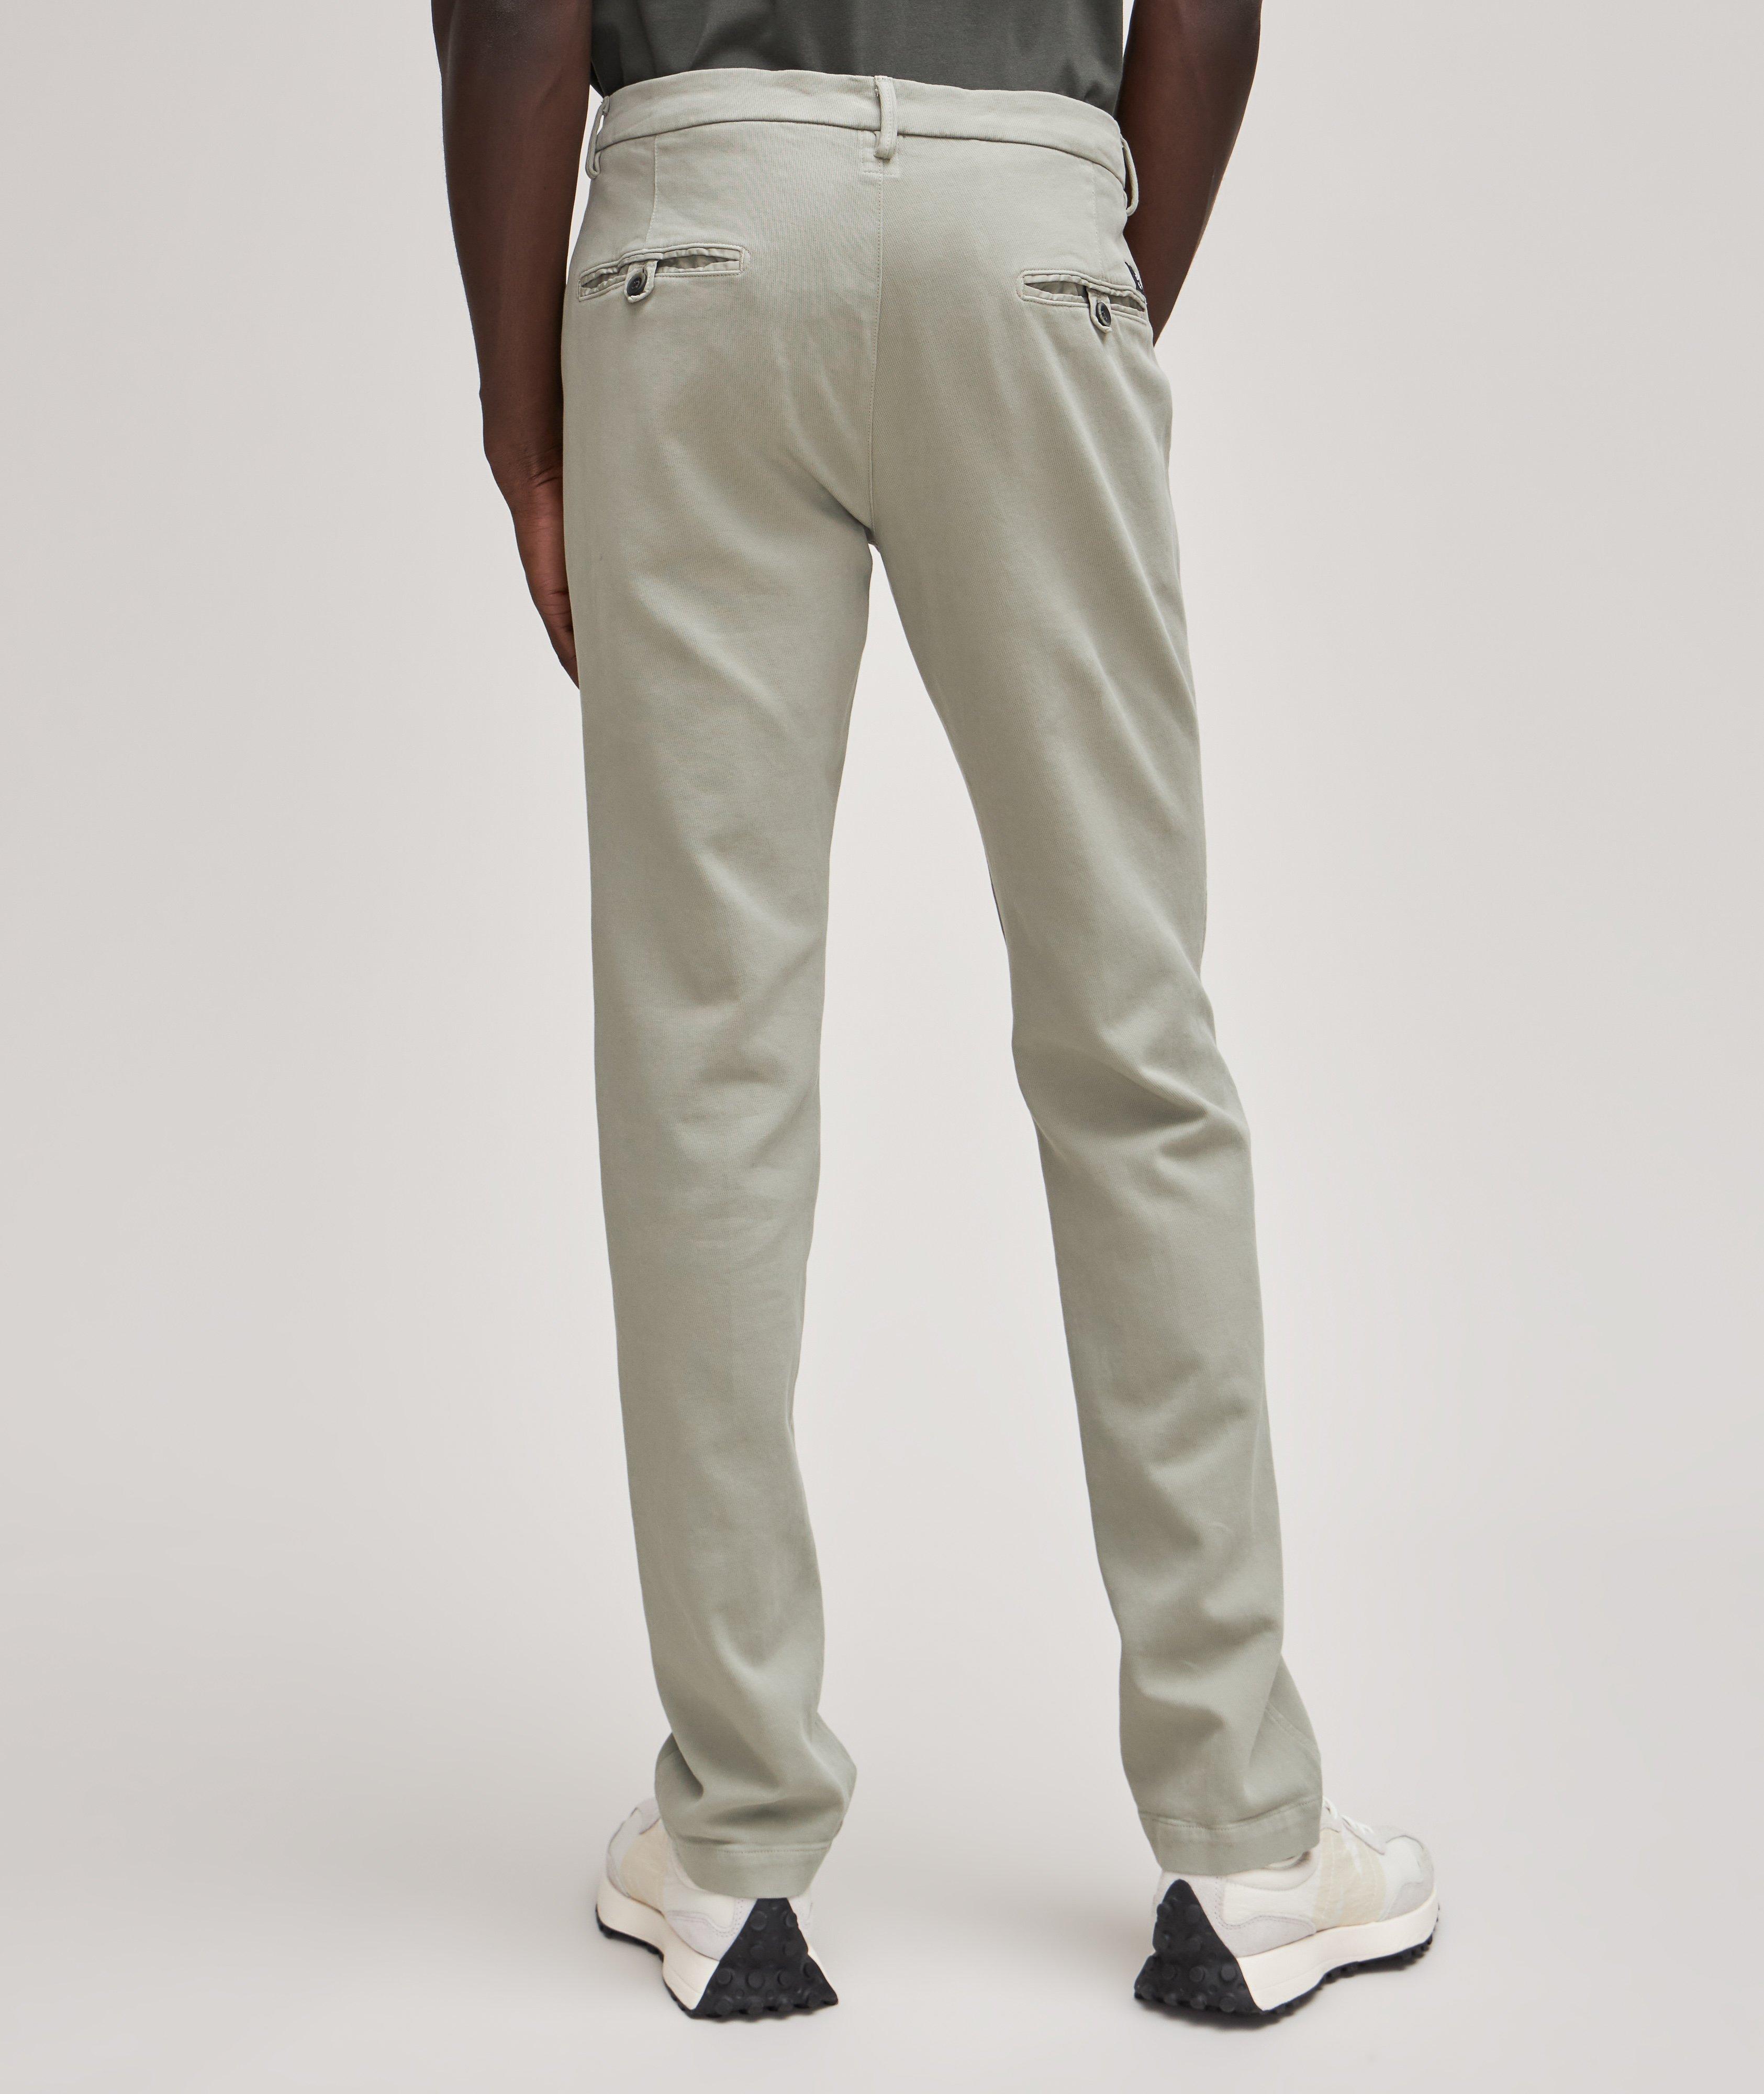 Slim Stretch Two-Tone Tailored Pant - Pink, Suit Pants